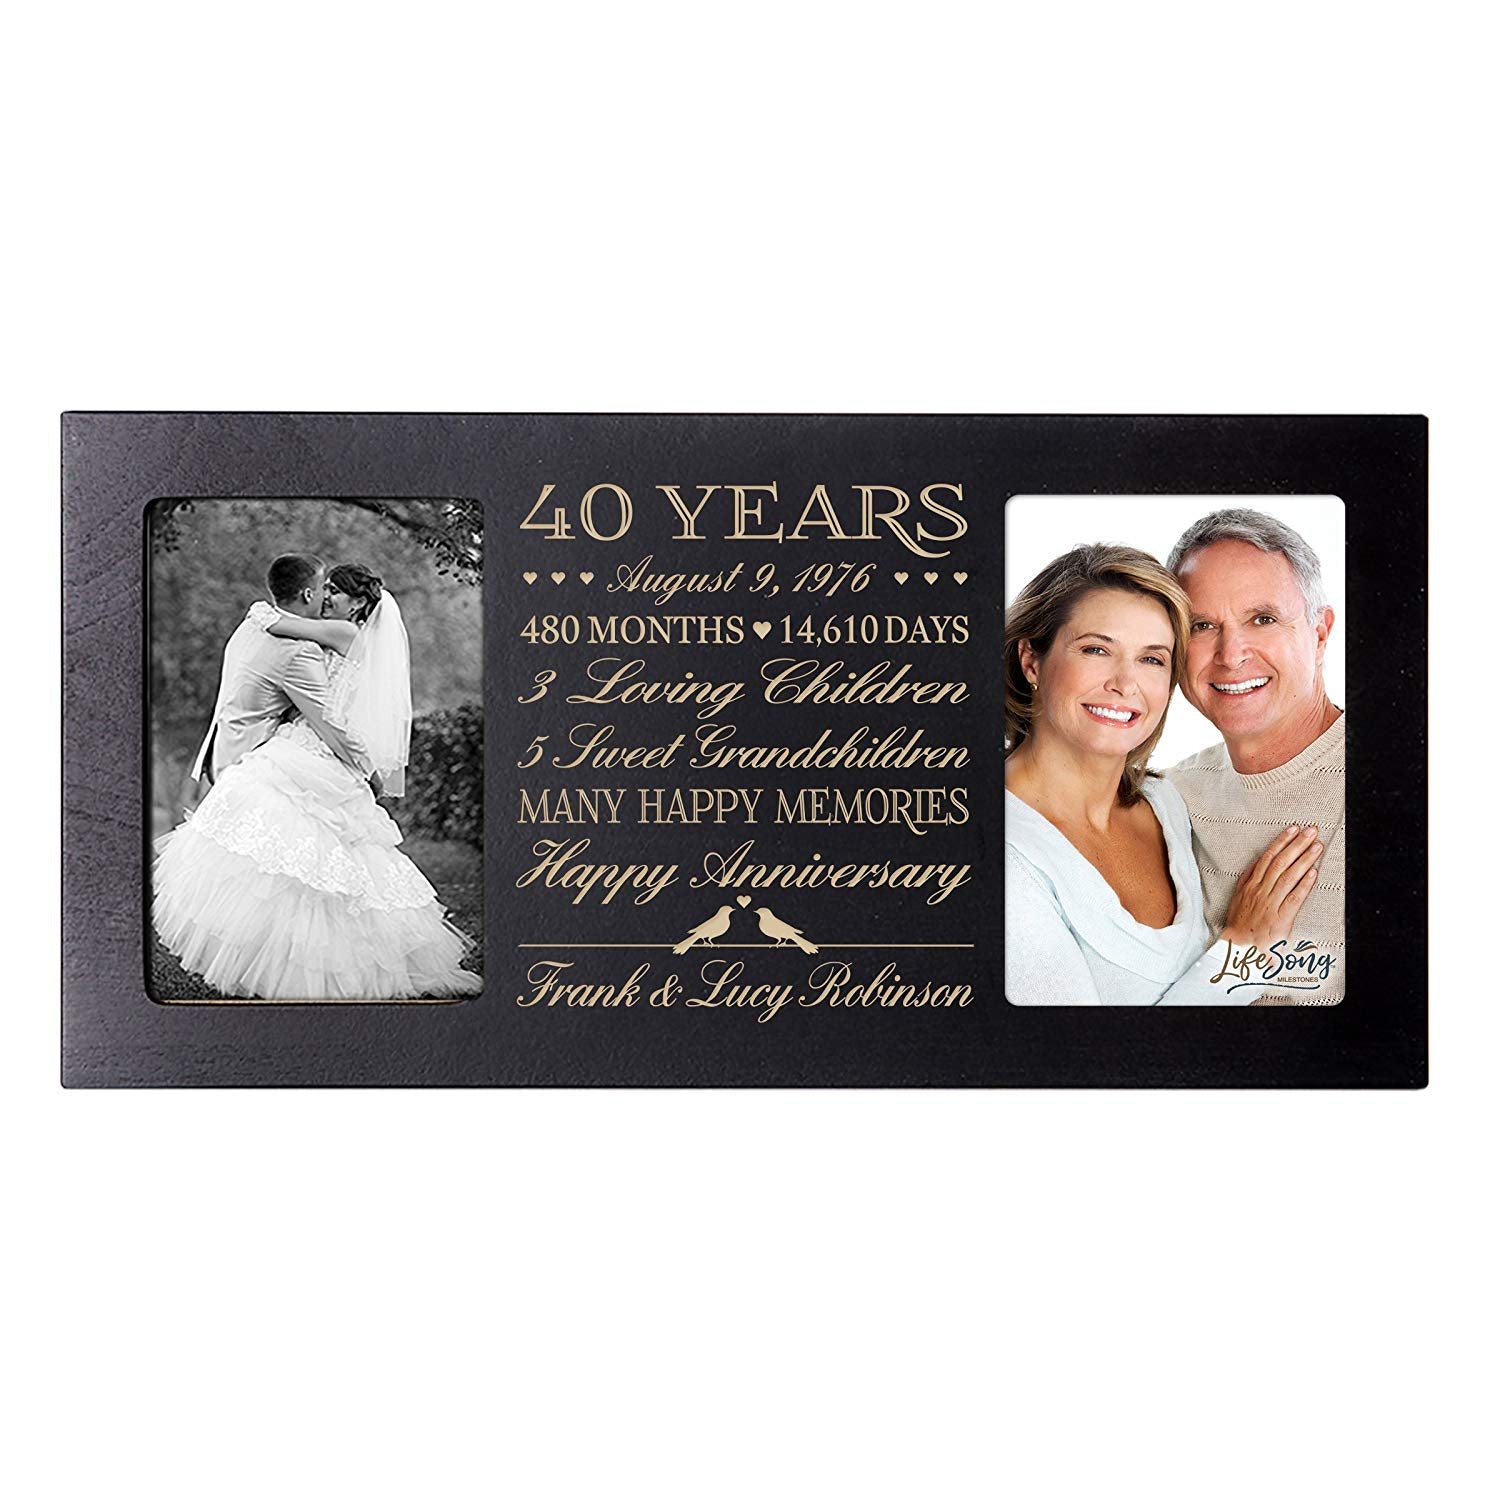 Lifesong Milestones Personalized Picture Frame for Couples 40th Wedding Anniversary Decorations